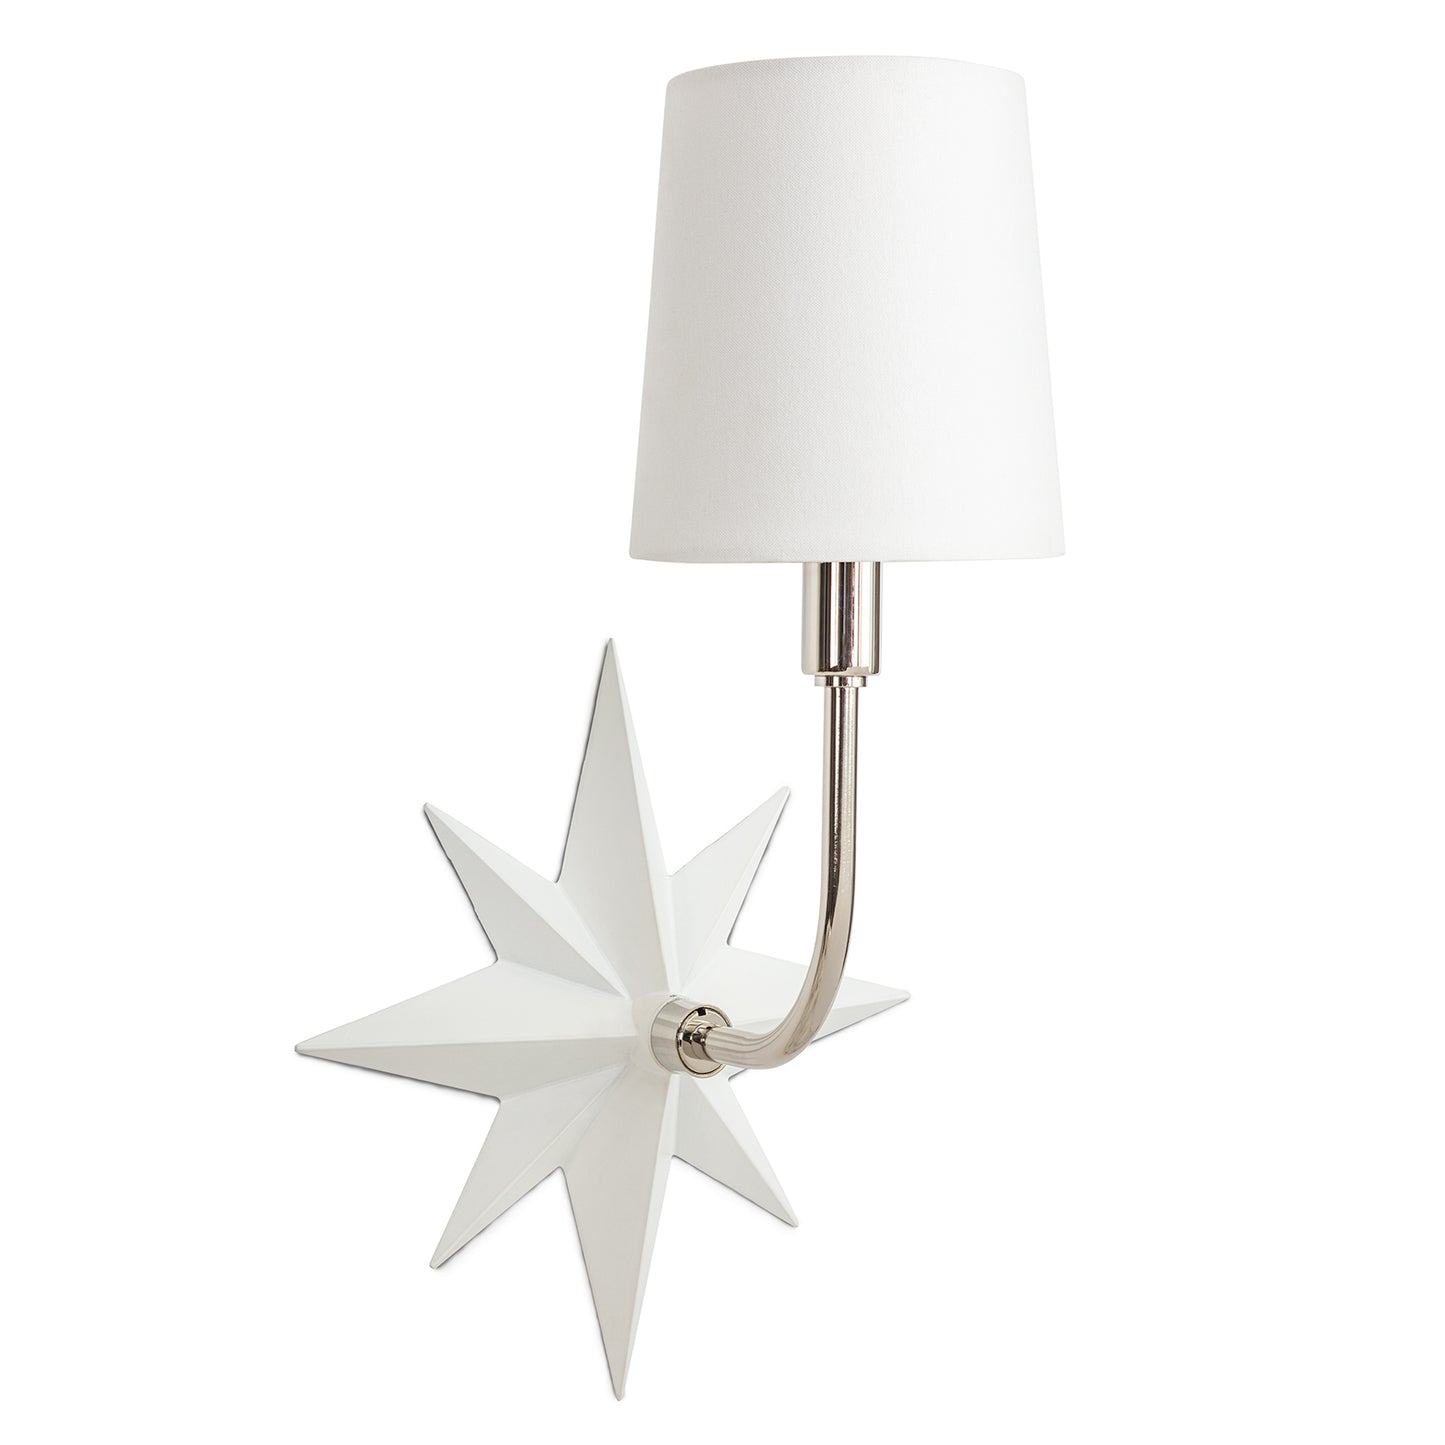 Etoile Sconce in Polished Nickel and White by Coastal Living